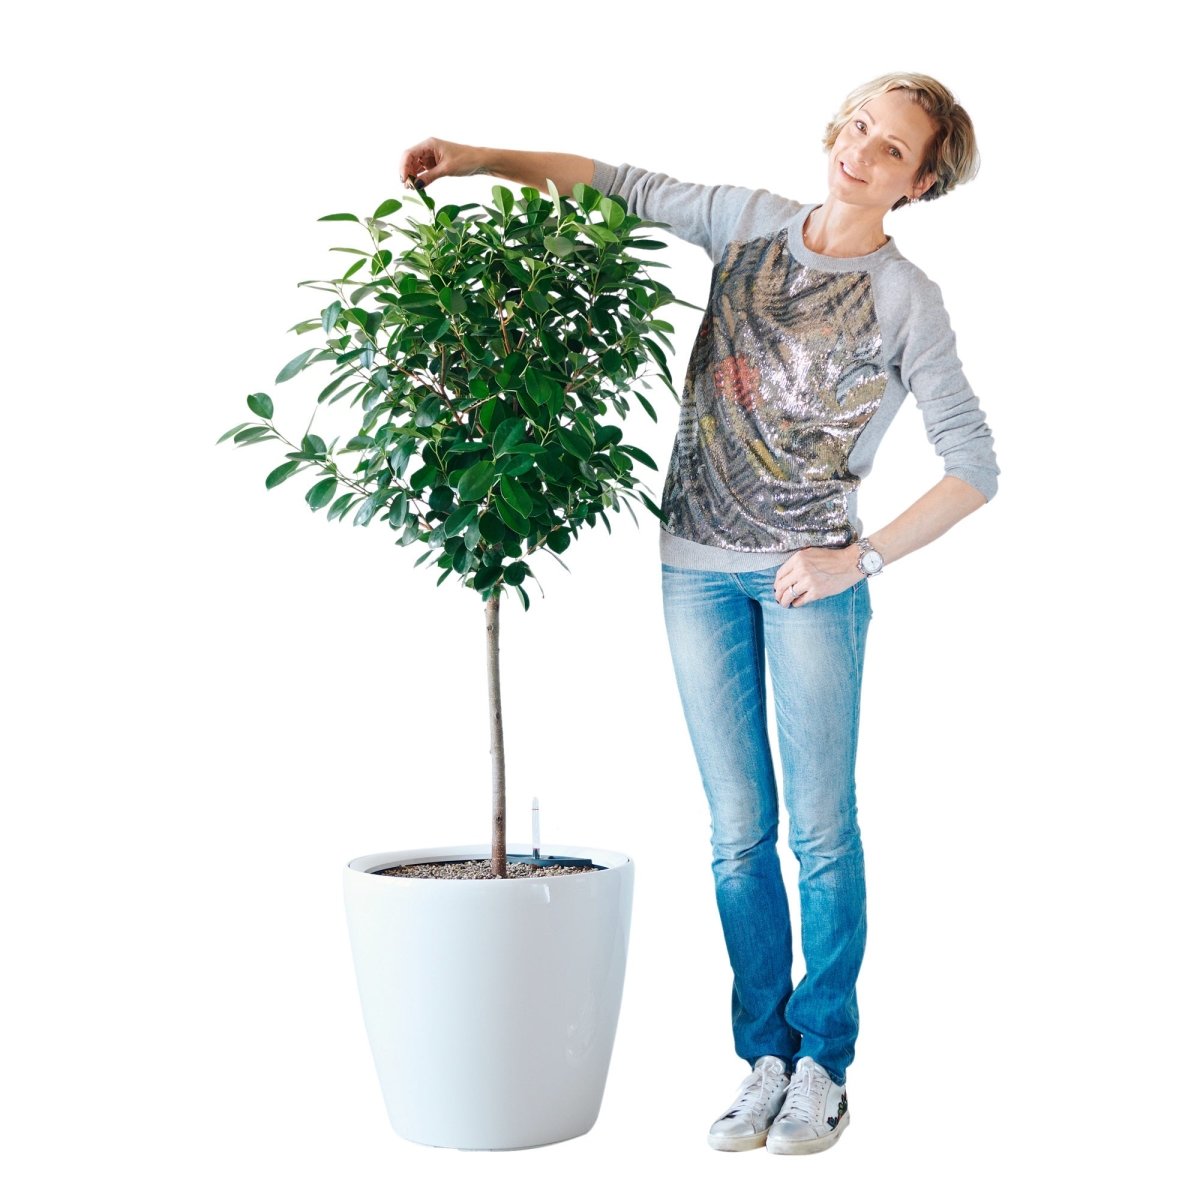 Ficus Moclame Potted In Lechuza Classico 50 Planter - White - My City Plants